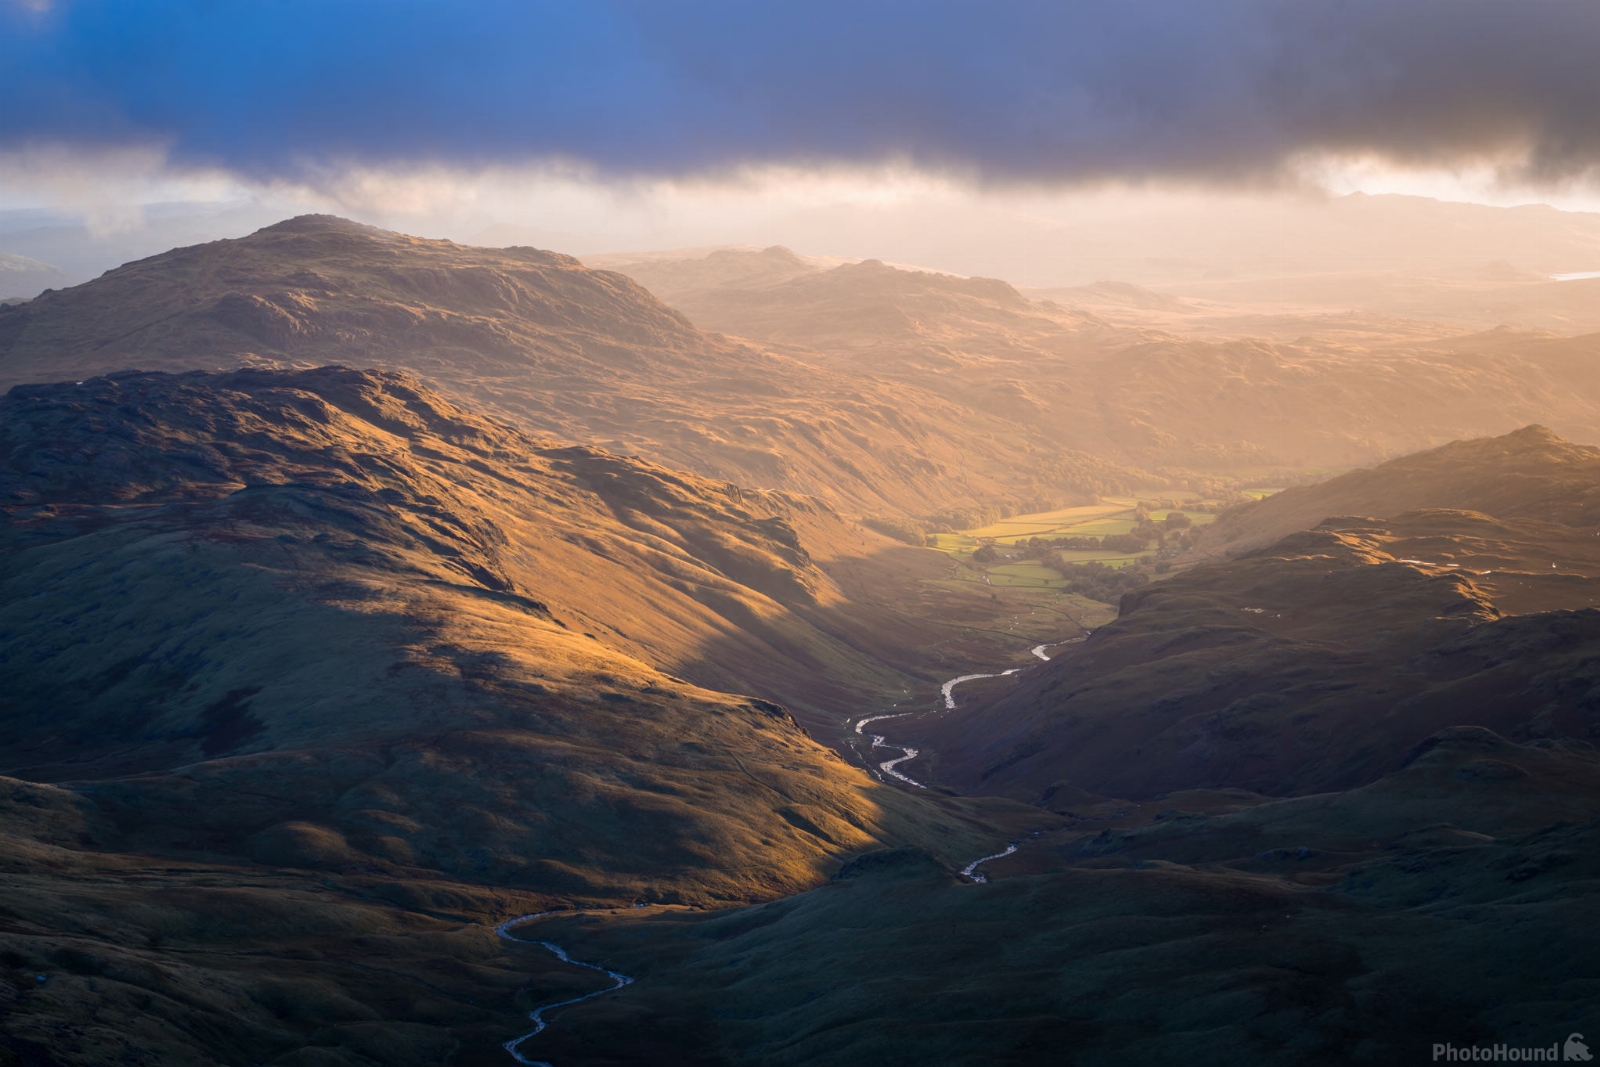 Image of Bowfell (Bow Fell) by James Grant